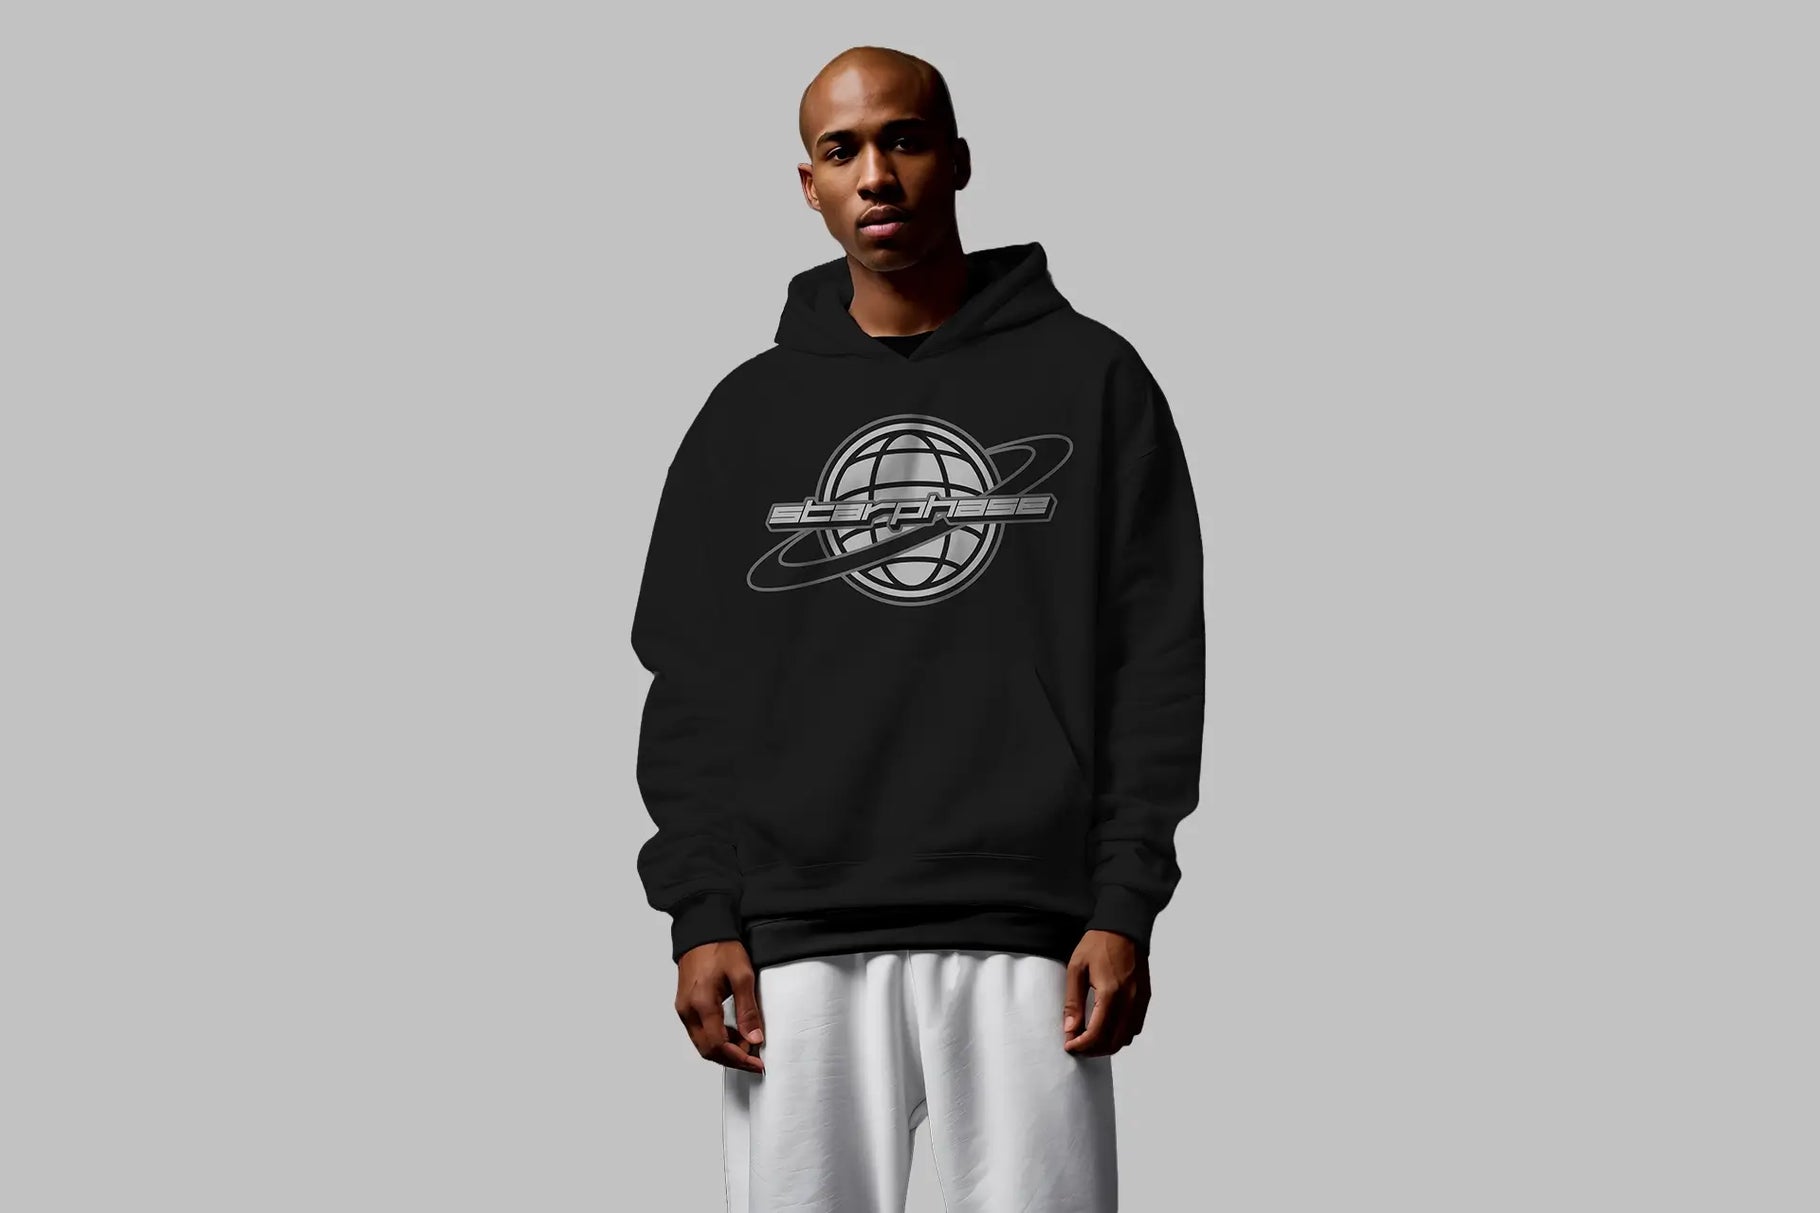 Starphase streetwear cover image